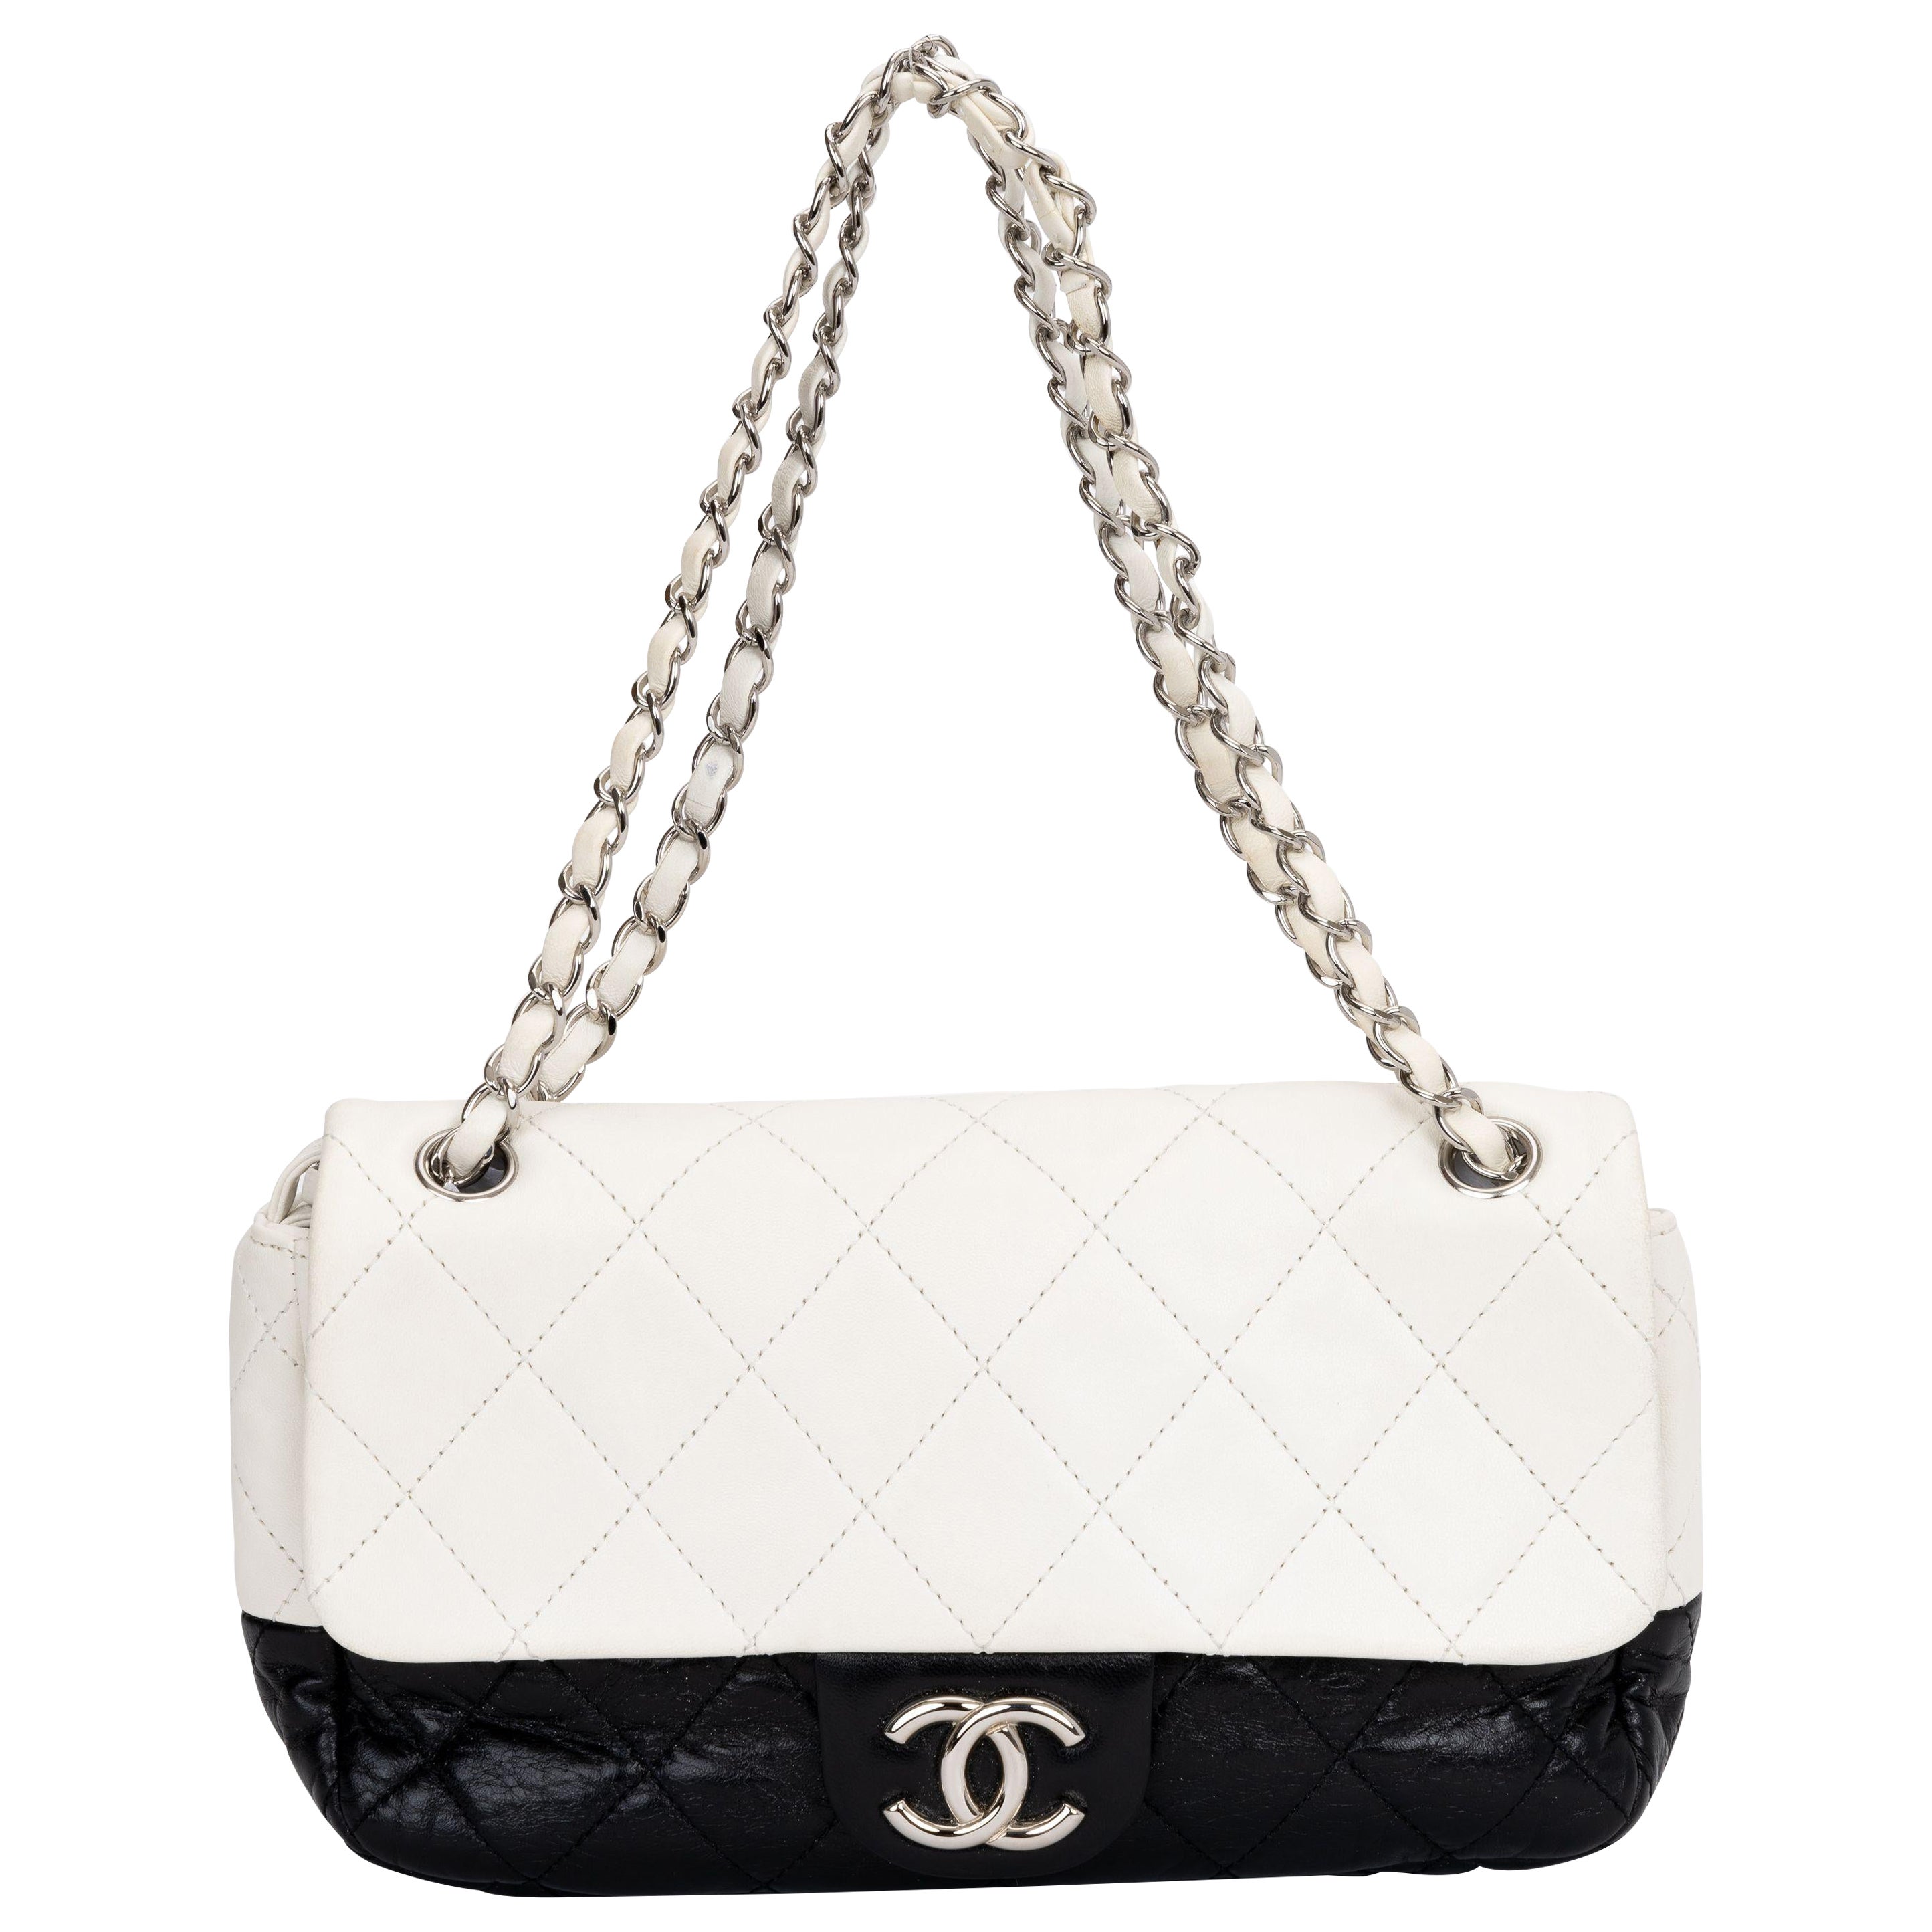 Chanel Black/White Leather Crossbody Bag For Sale